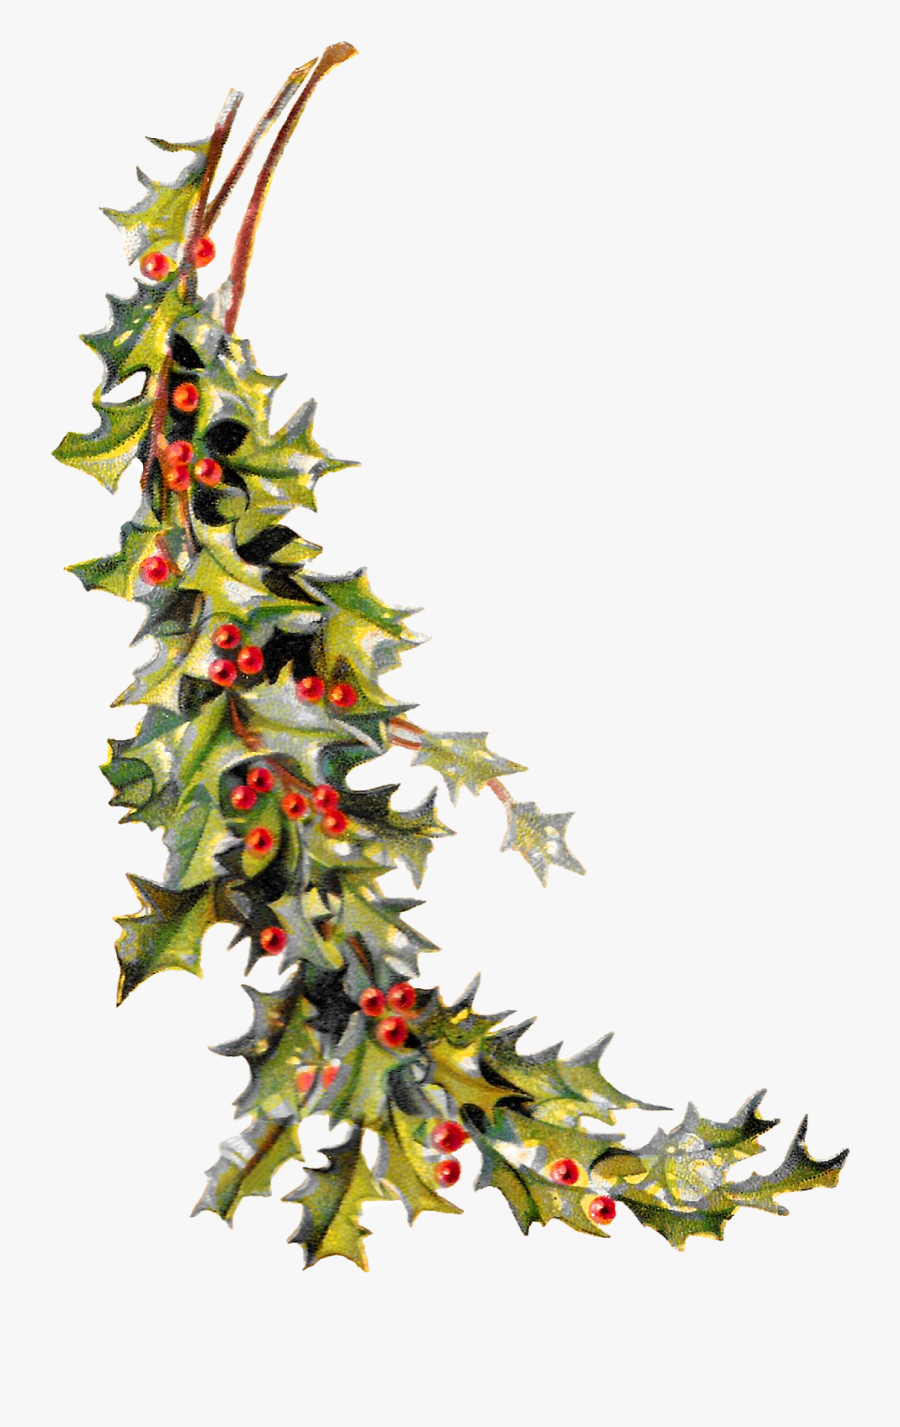 Free Christmas Clipart Holly - Free Vintage Christmas Holly Border Clipart, Transparent Clipart